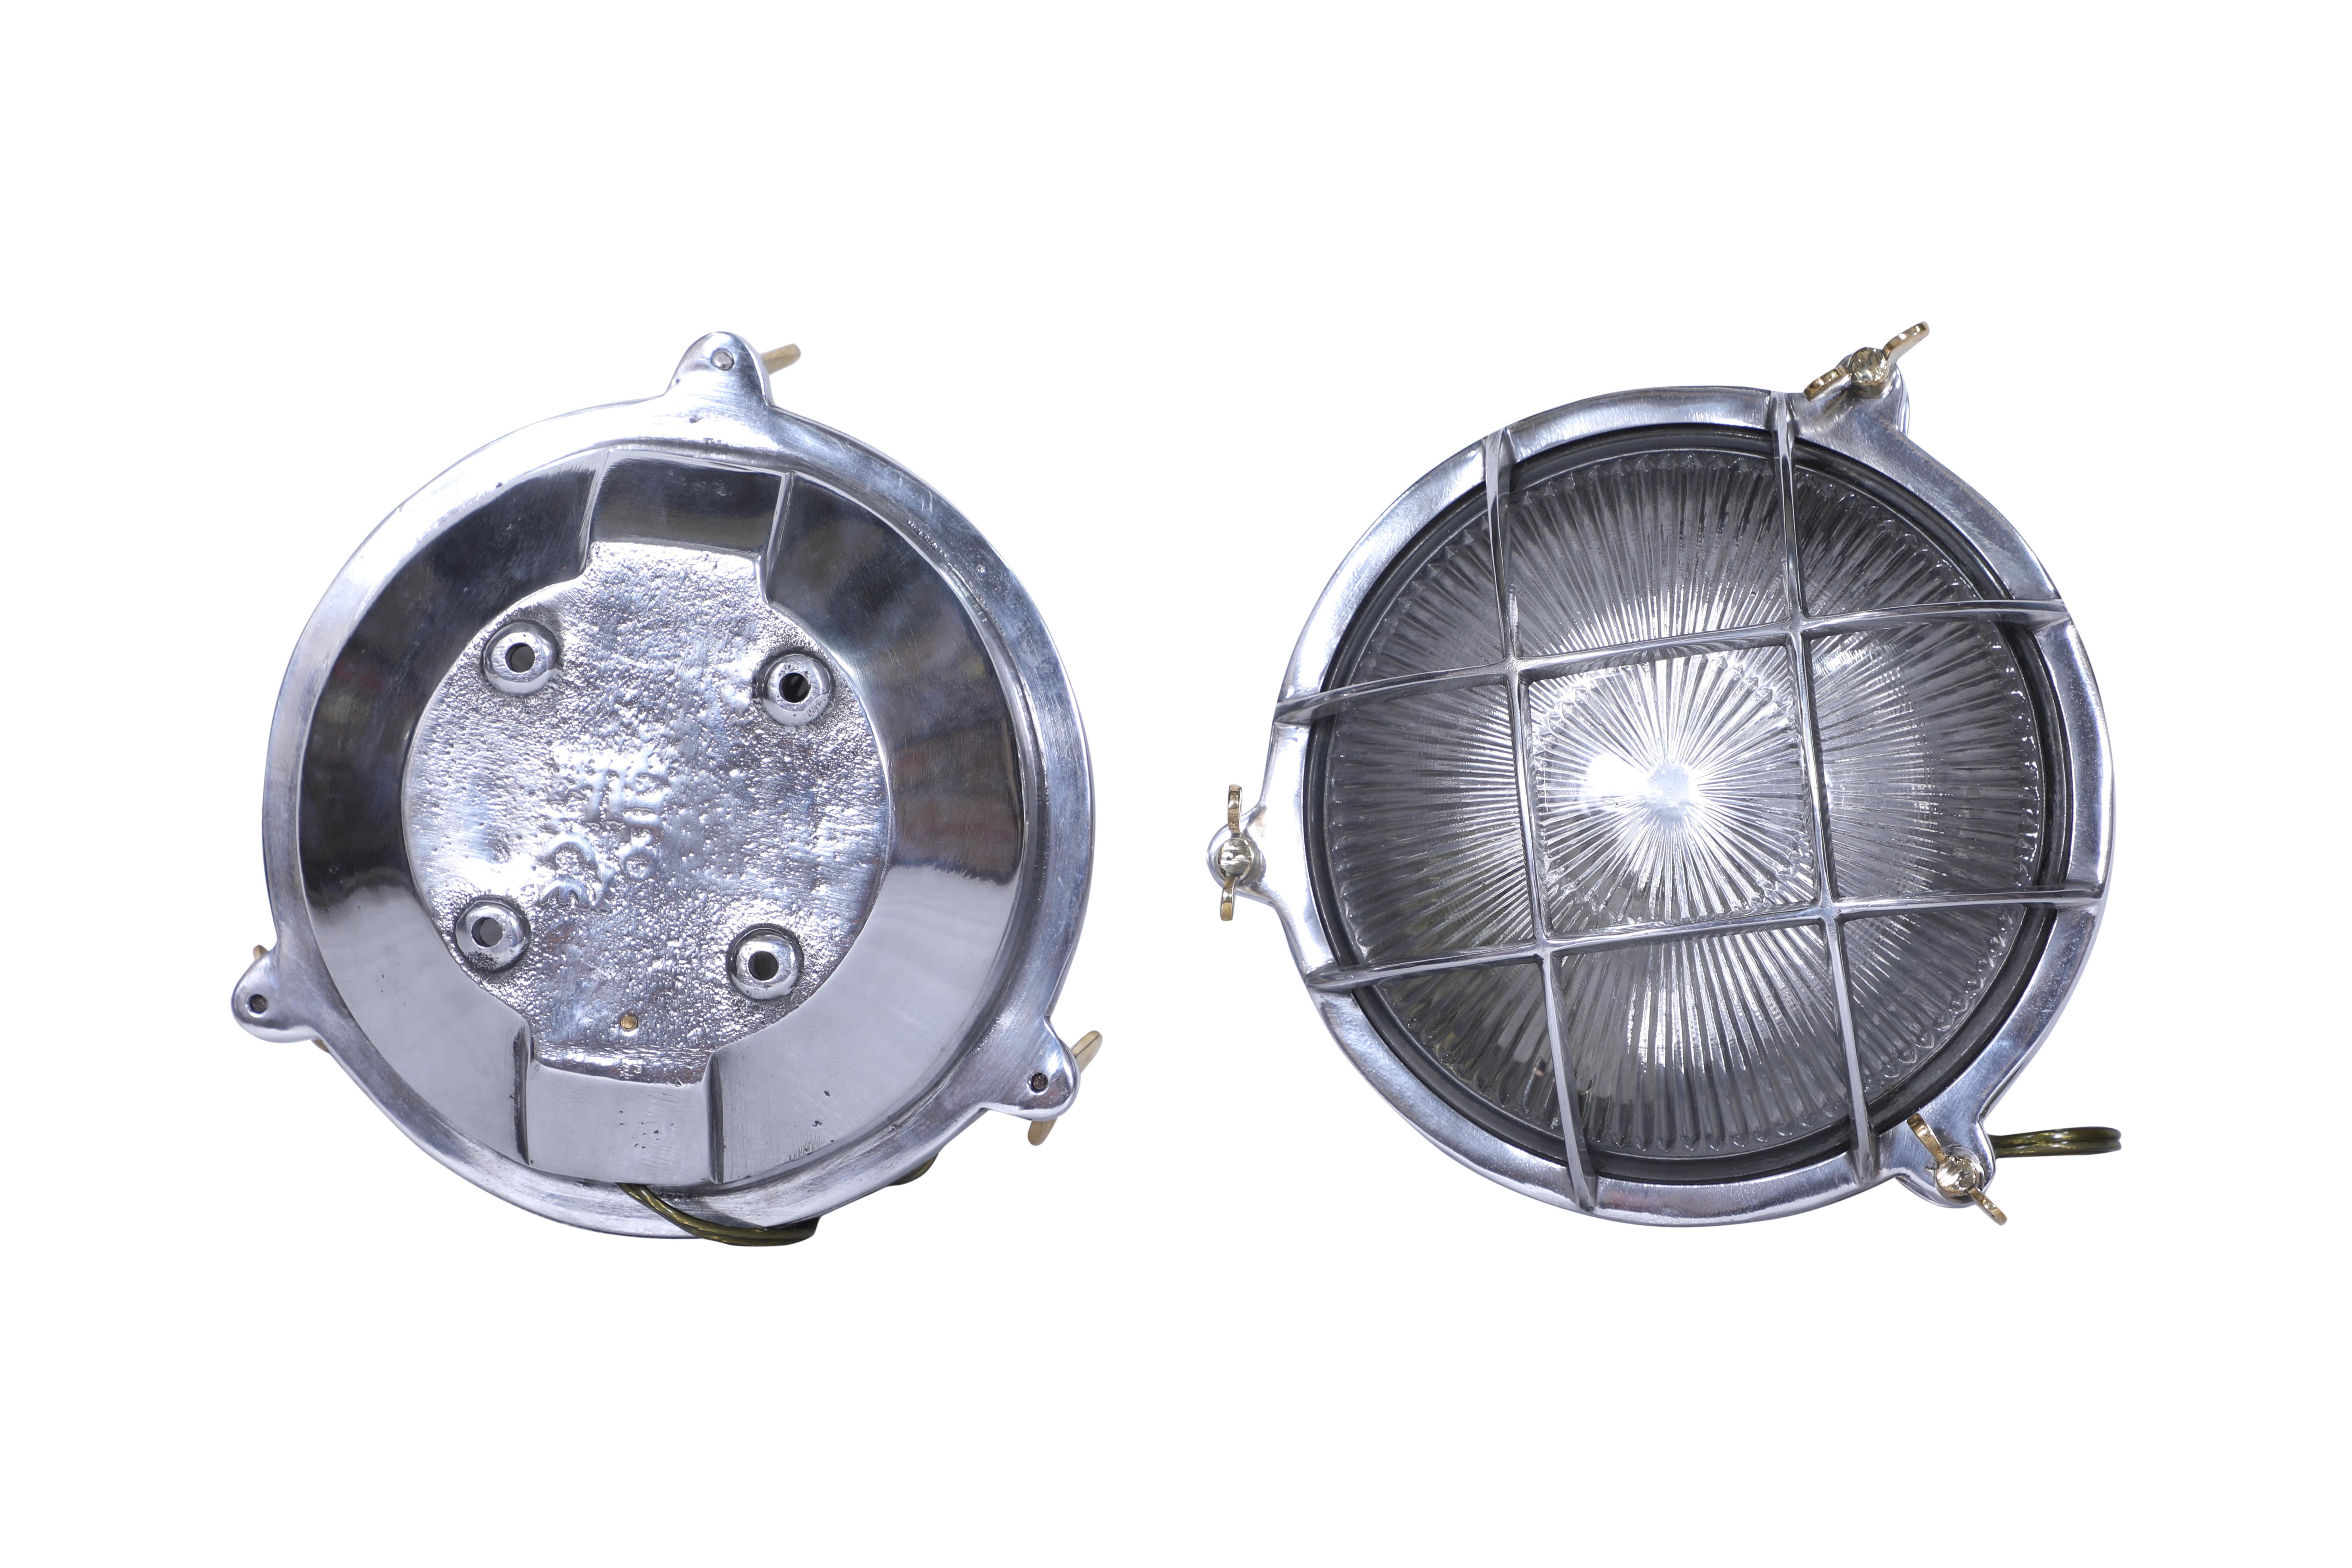 Pair of ship's chrome passageway lights with textured glass shade and chrome grid cage fronts.  Brass butterfly wing nuts to open.  Rewired for American use and takes a standard base light bulb.  Originally used in succession on a ship's passageway